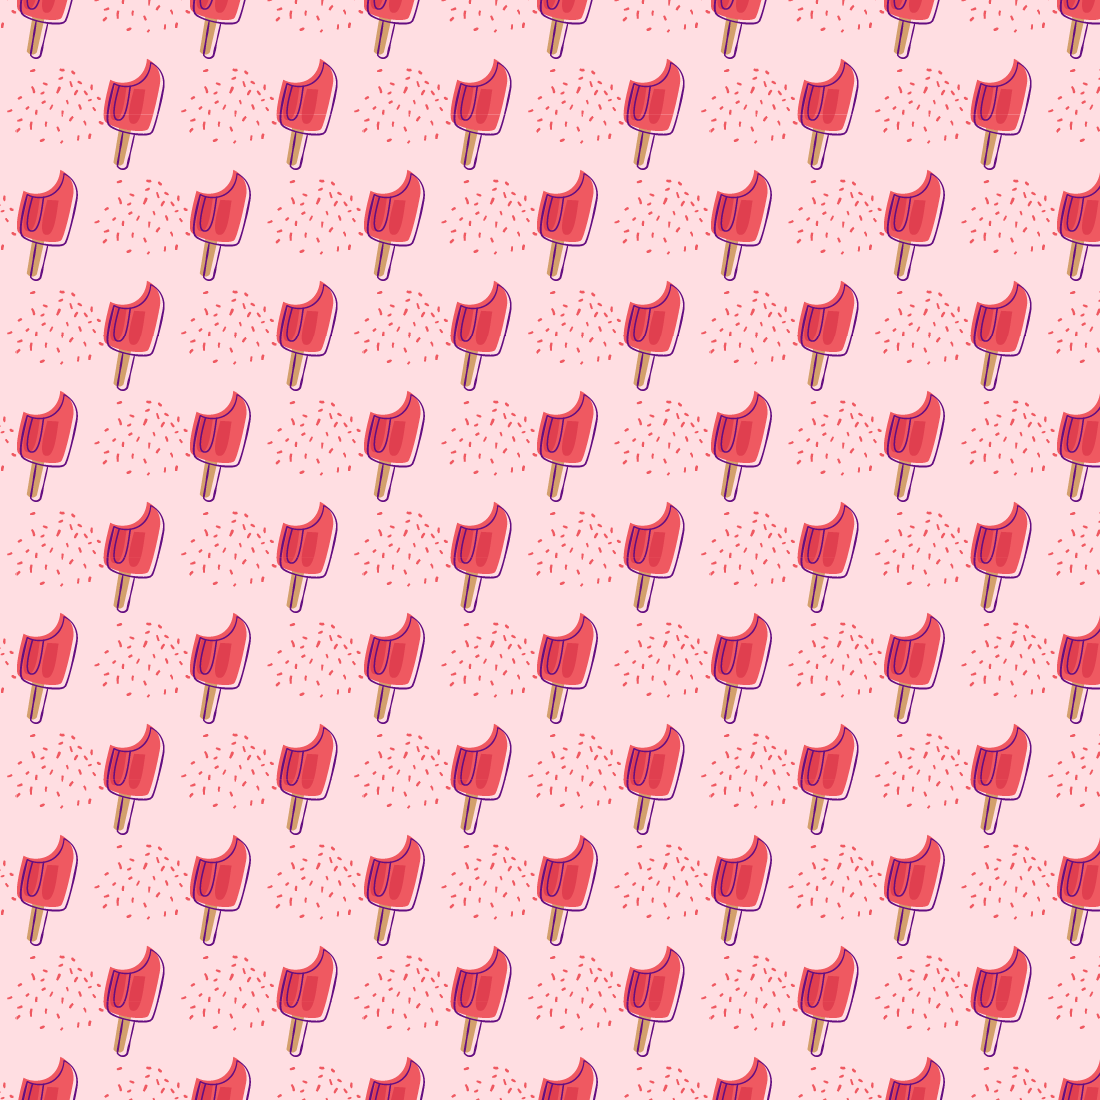 Hand drawn ice-creams pattern in pastel colors preview image.